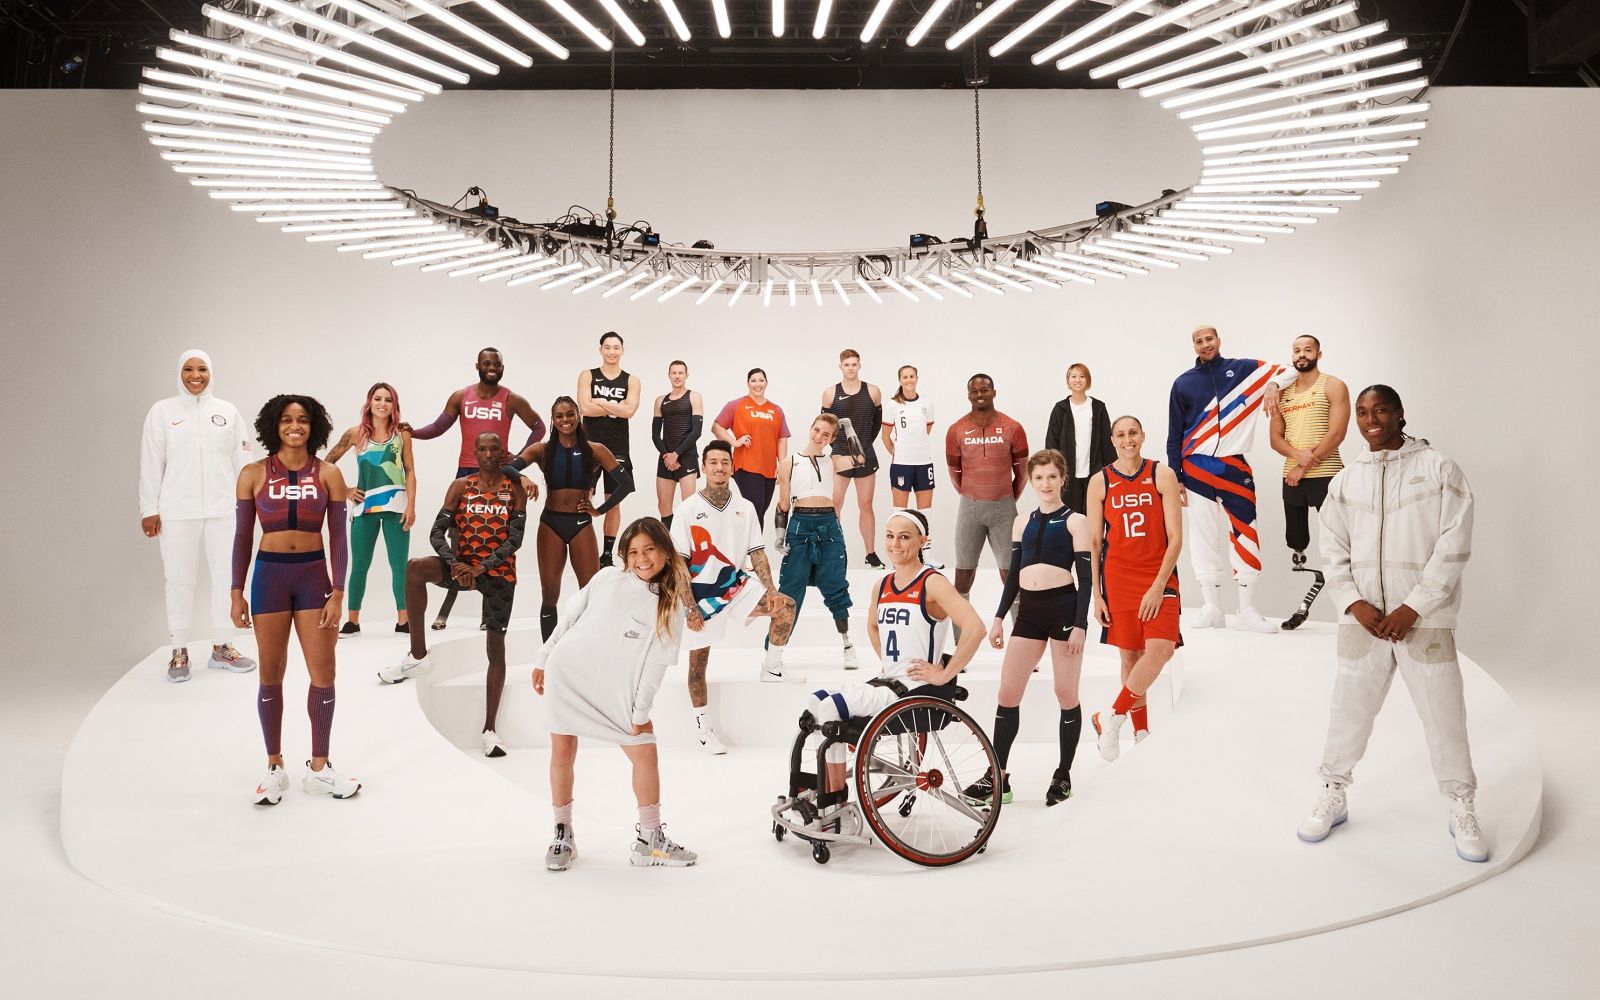 collaborations presented at the Nike Future Sport Forum 2020